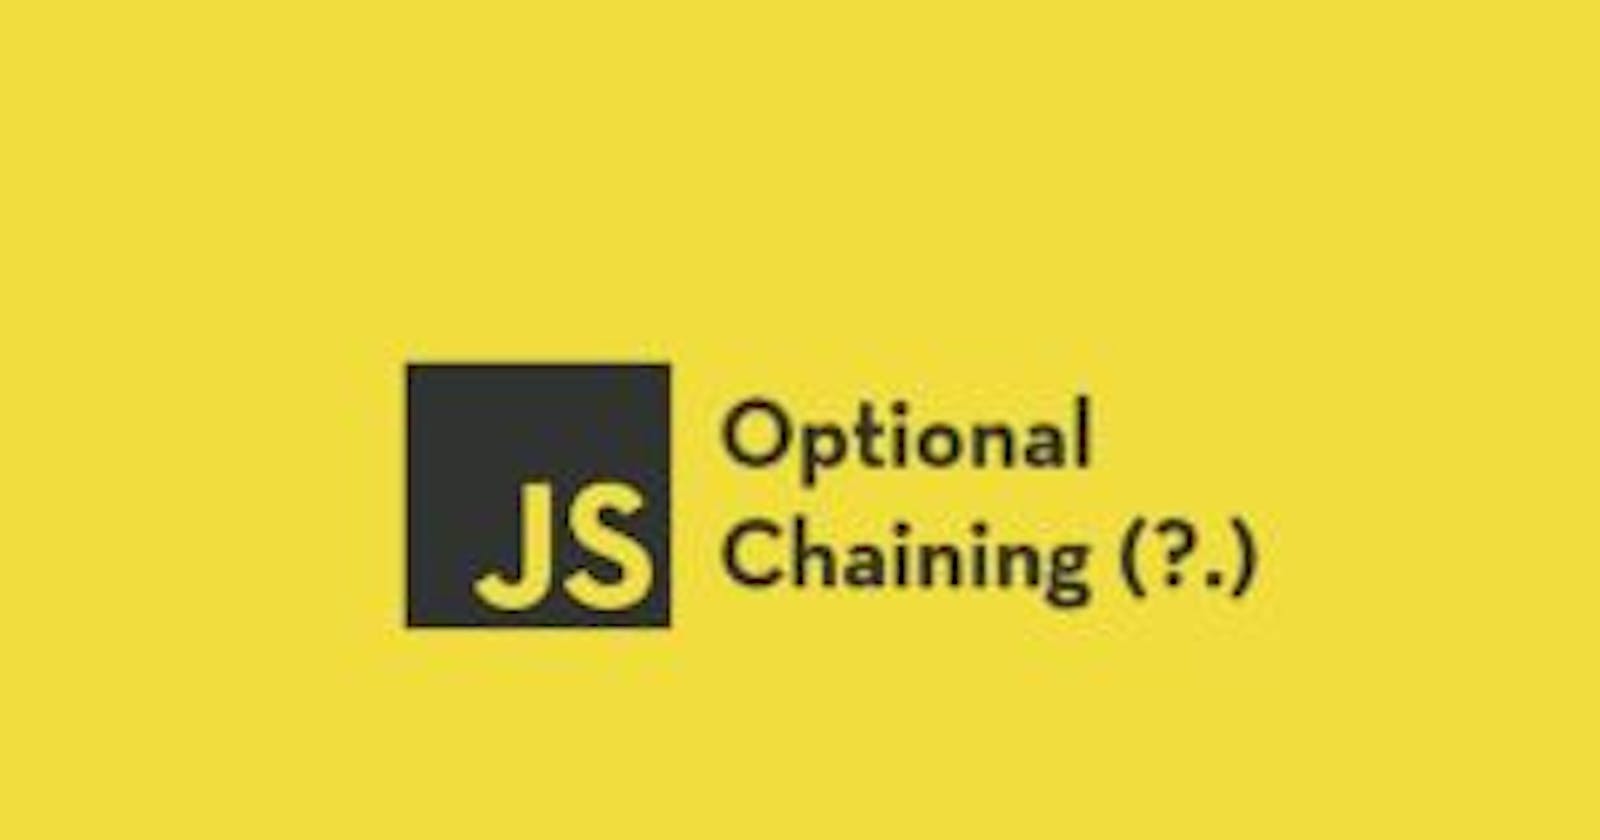 Using the optional chaining operator in JavaScript